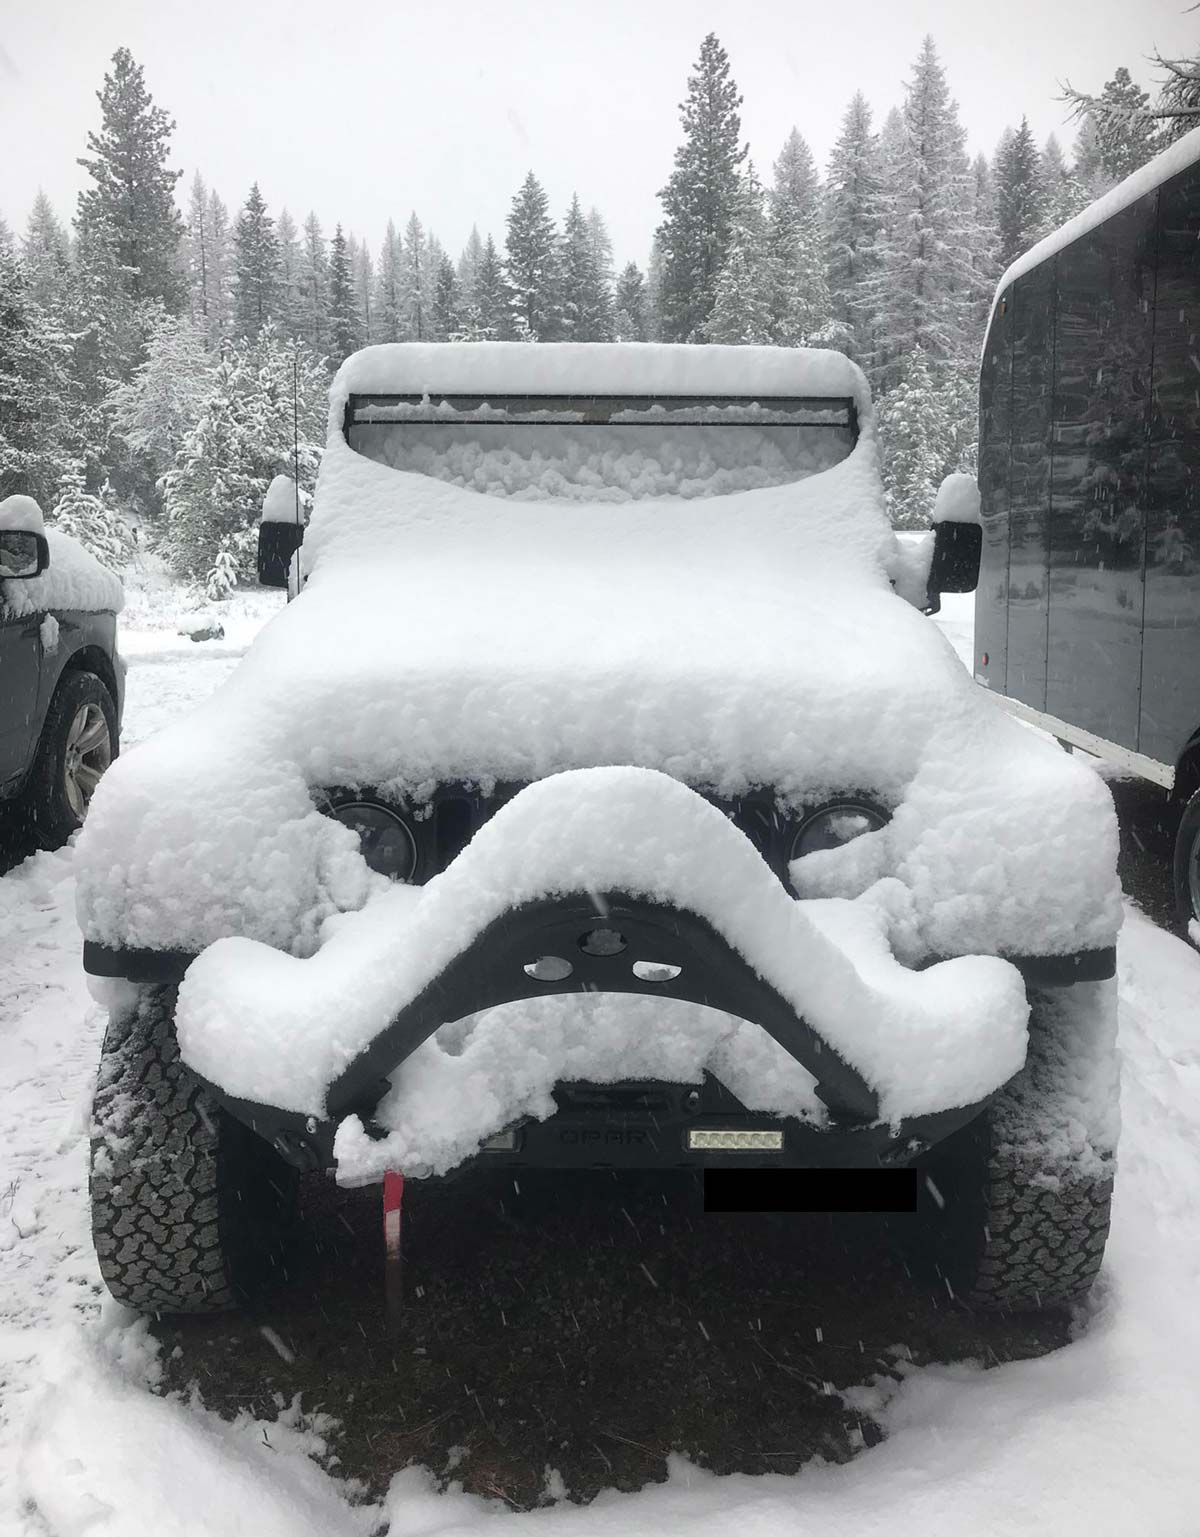 It snowed this morning. I don’t think the Jeep was happy about it